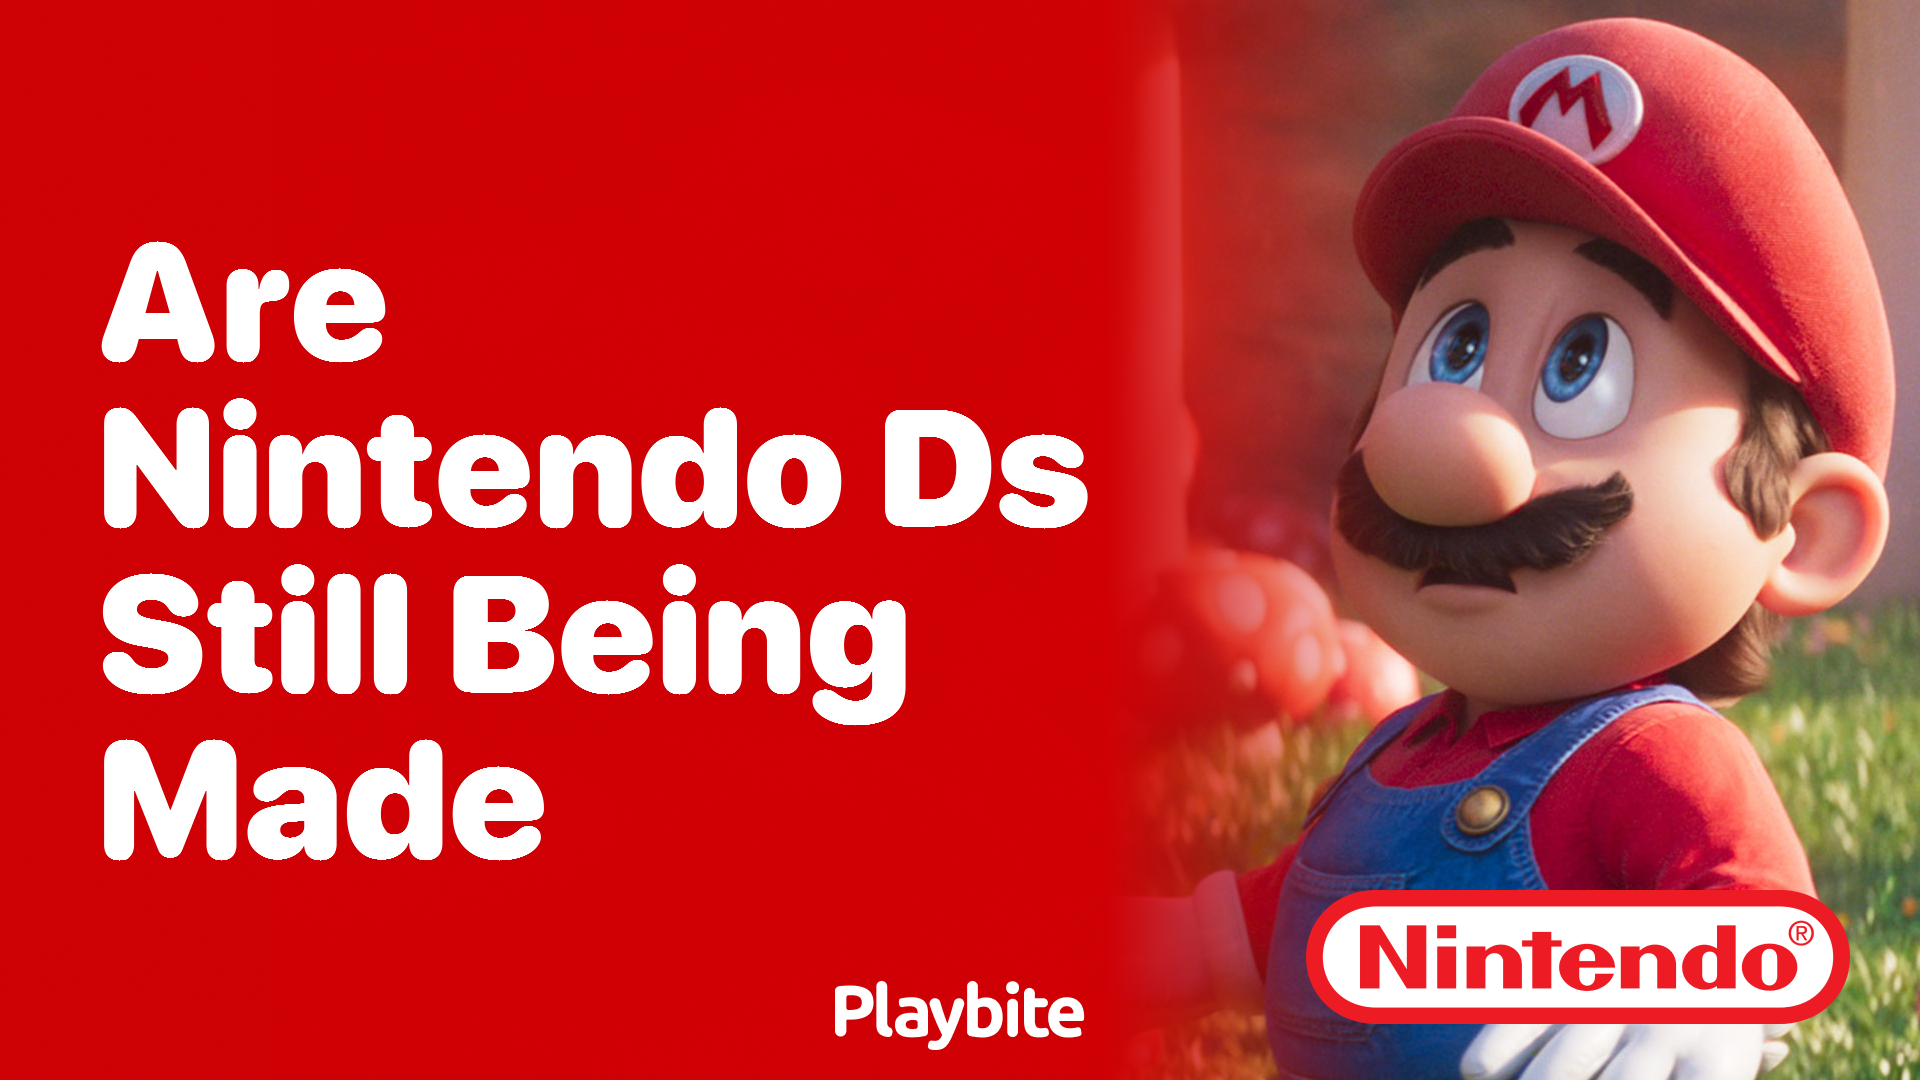 Are Nintendo DS Still Being Made?